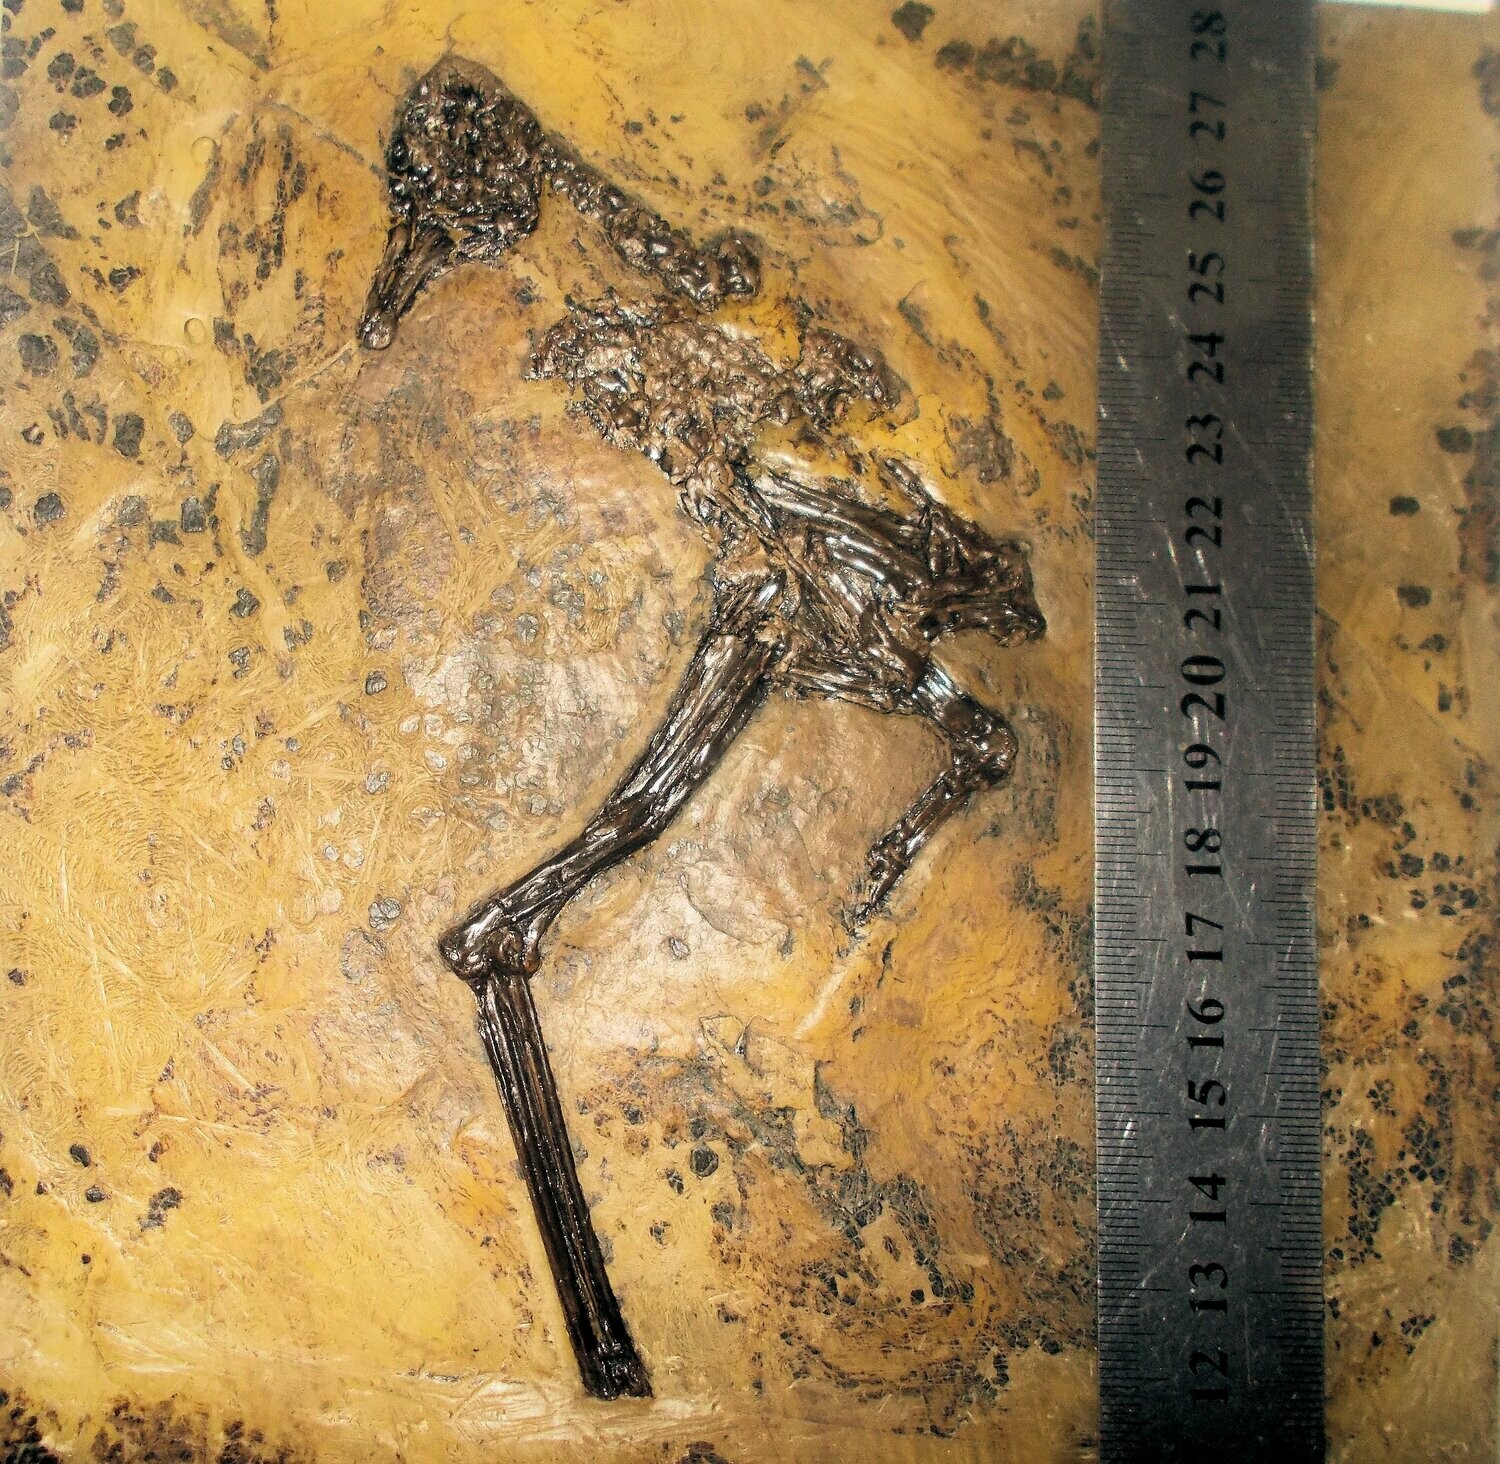 Fine and rare 16cm near-complete bird: Messelornis cristata with complete skull and mandibles, vertebrae hind-limb bones and wing bones in fine detail.